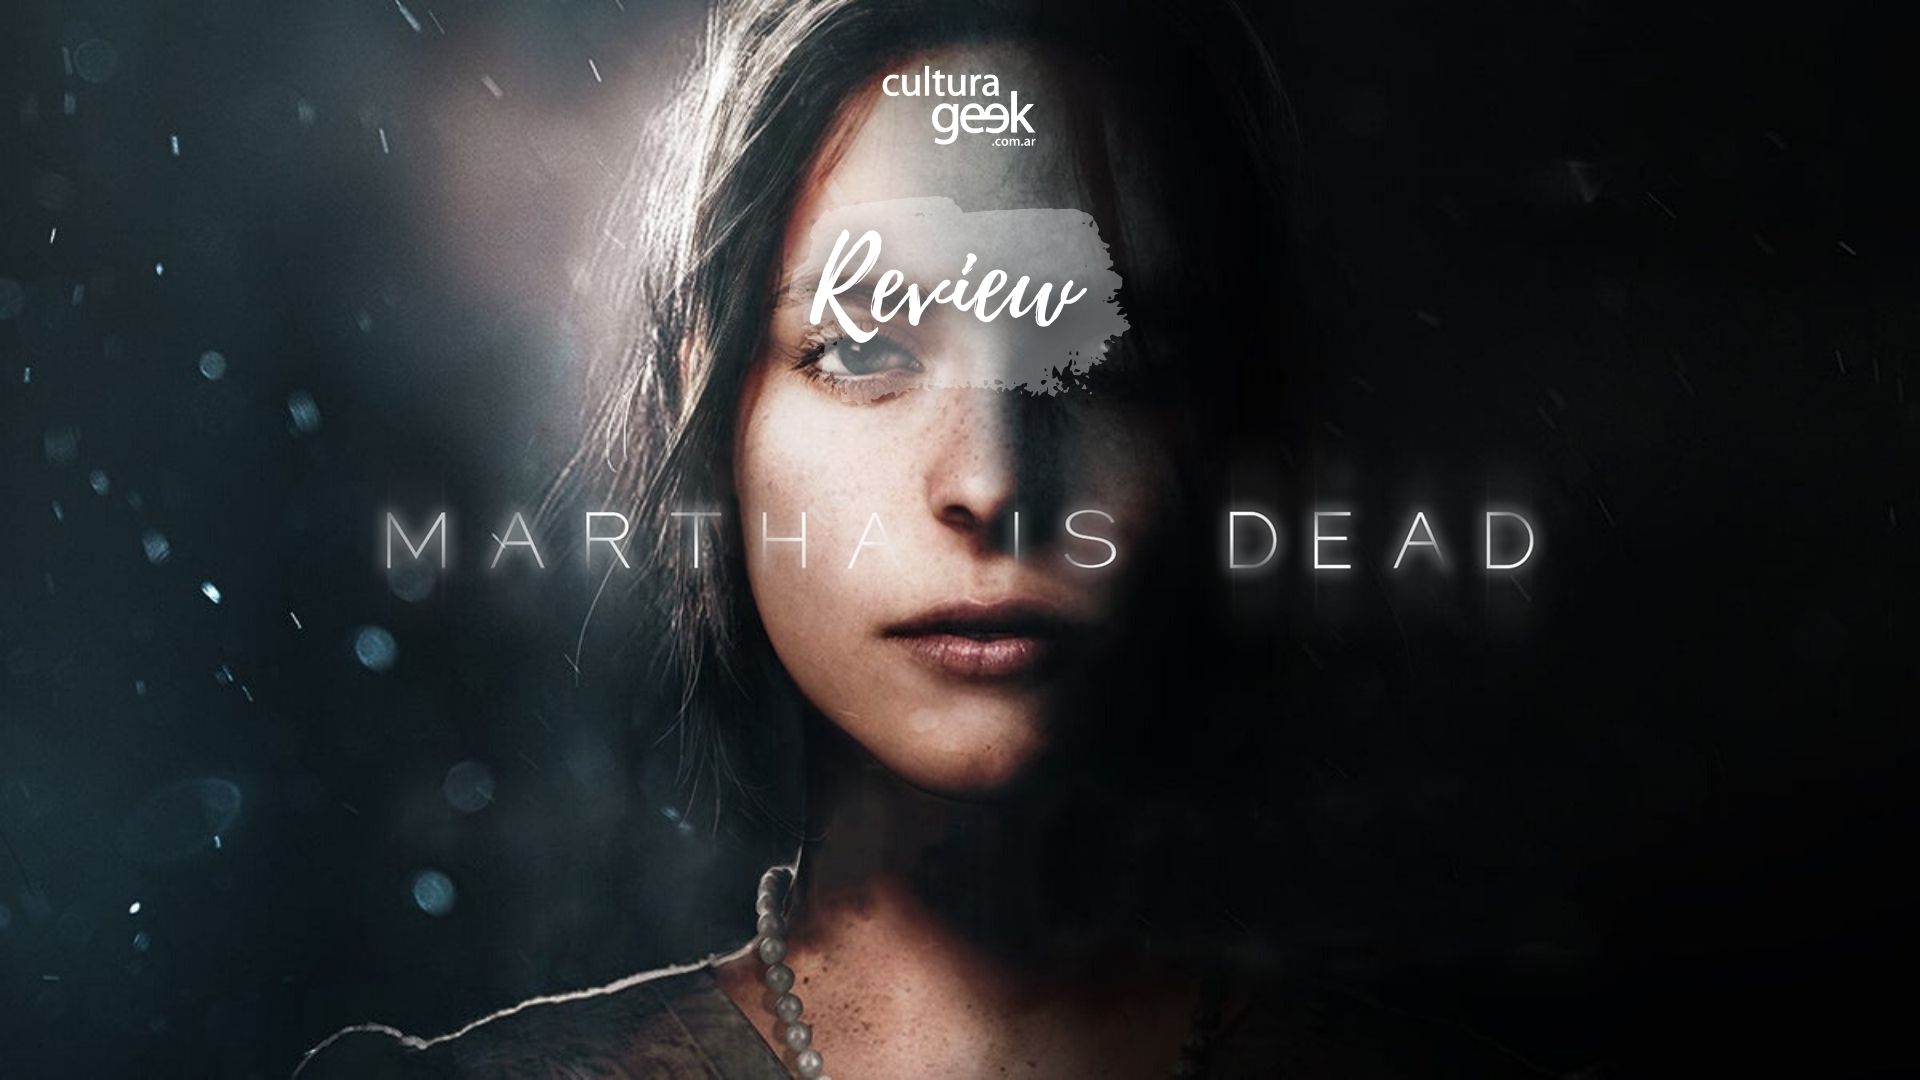 Martha is dead review